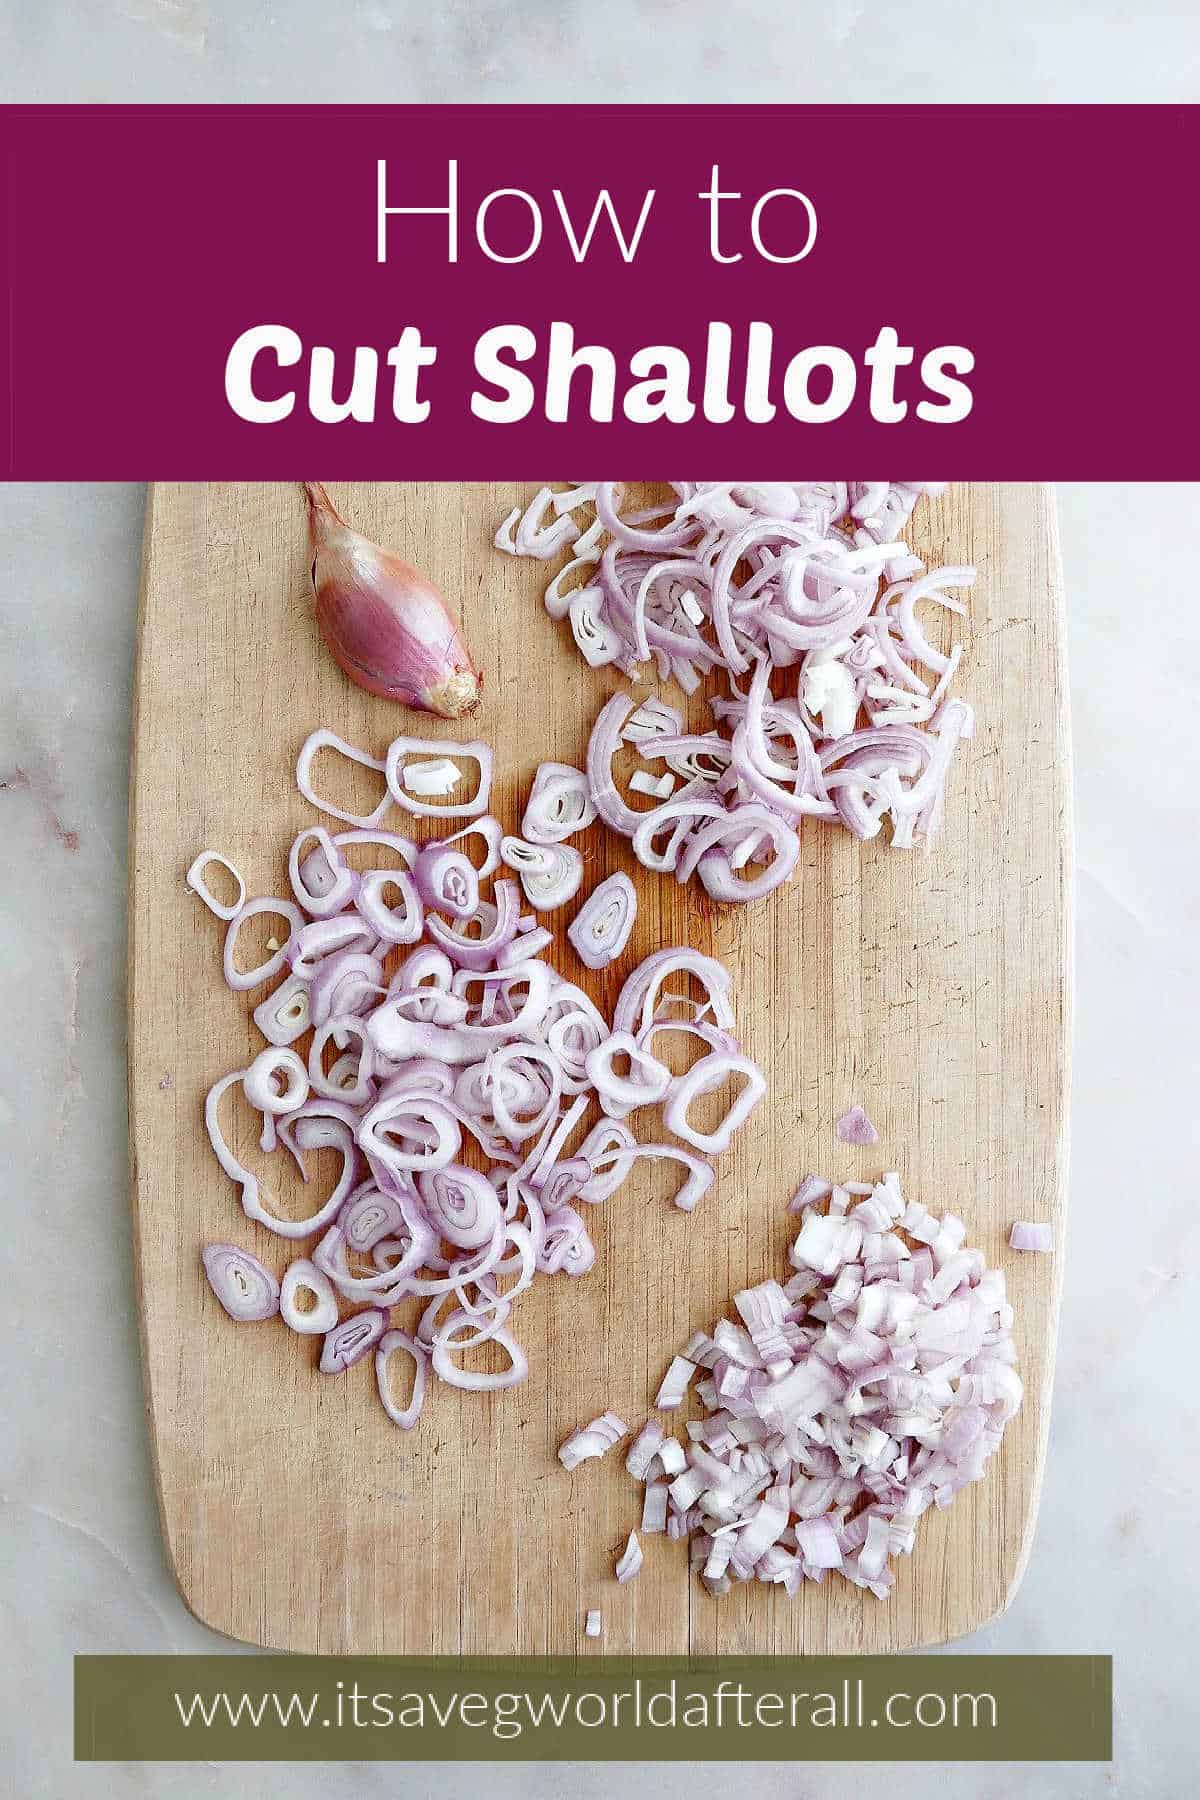 image of sliced and diced shallots on a cutting board under text box with recipe title